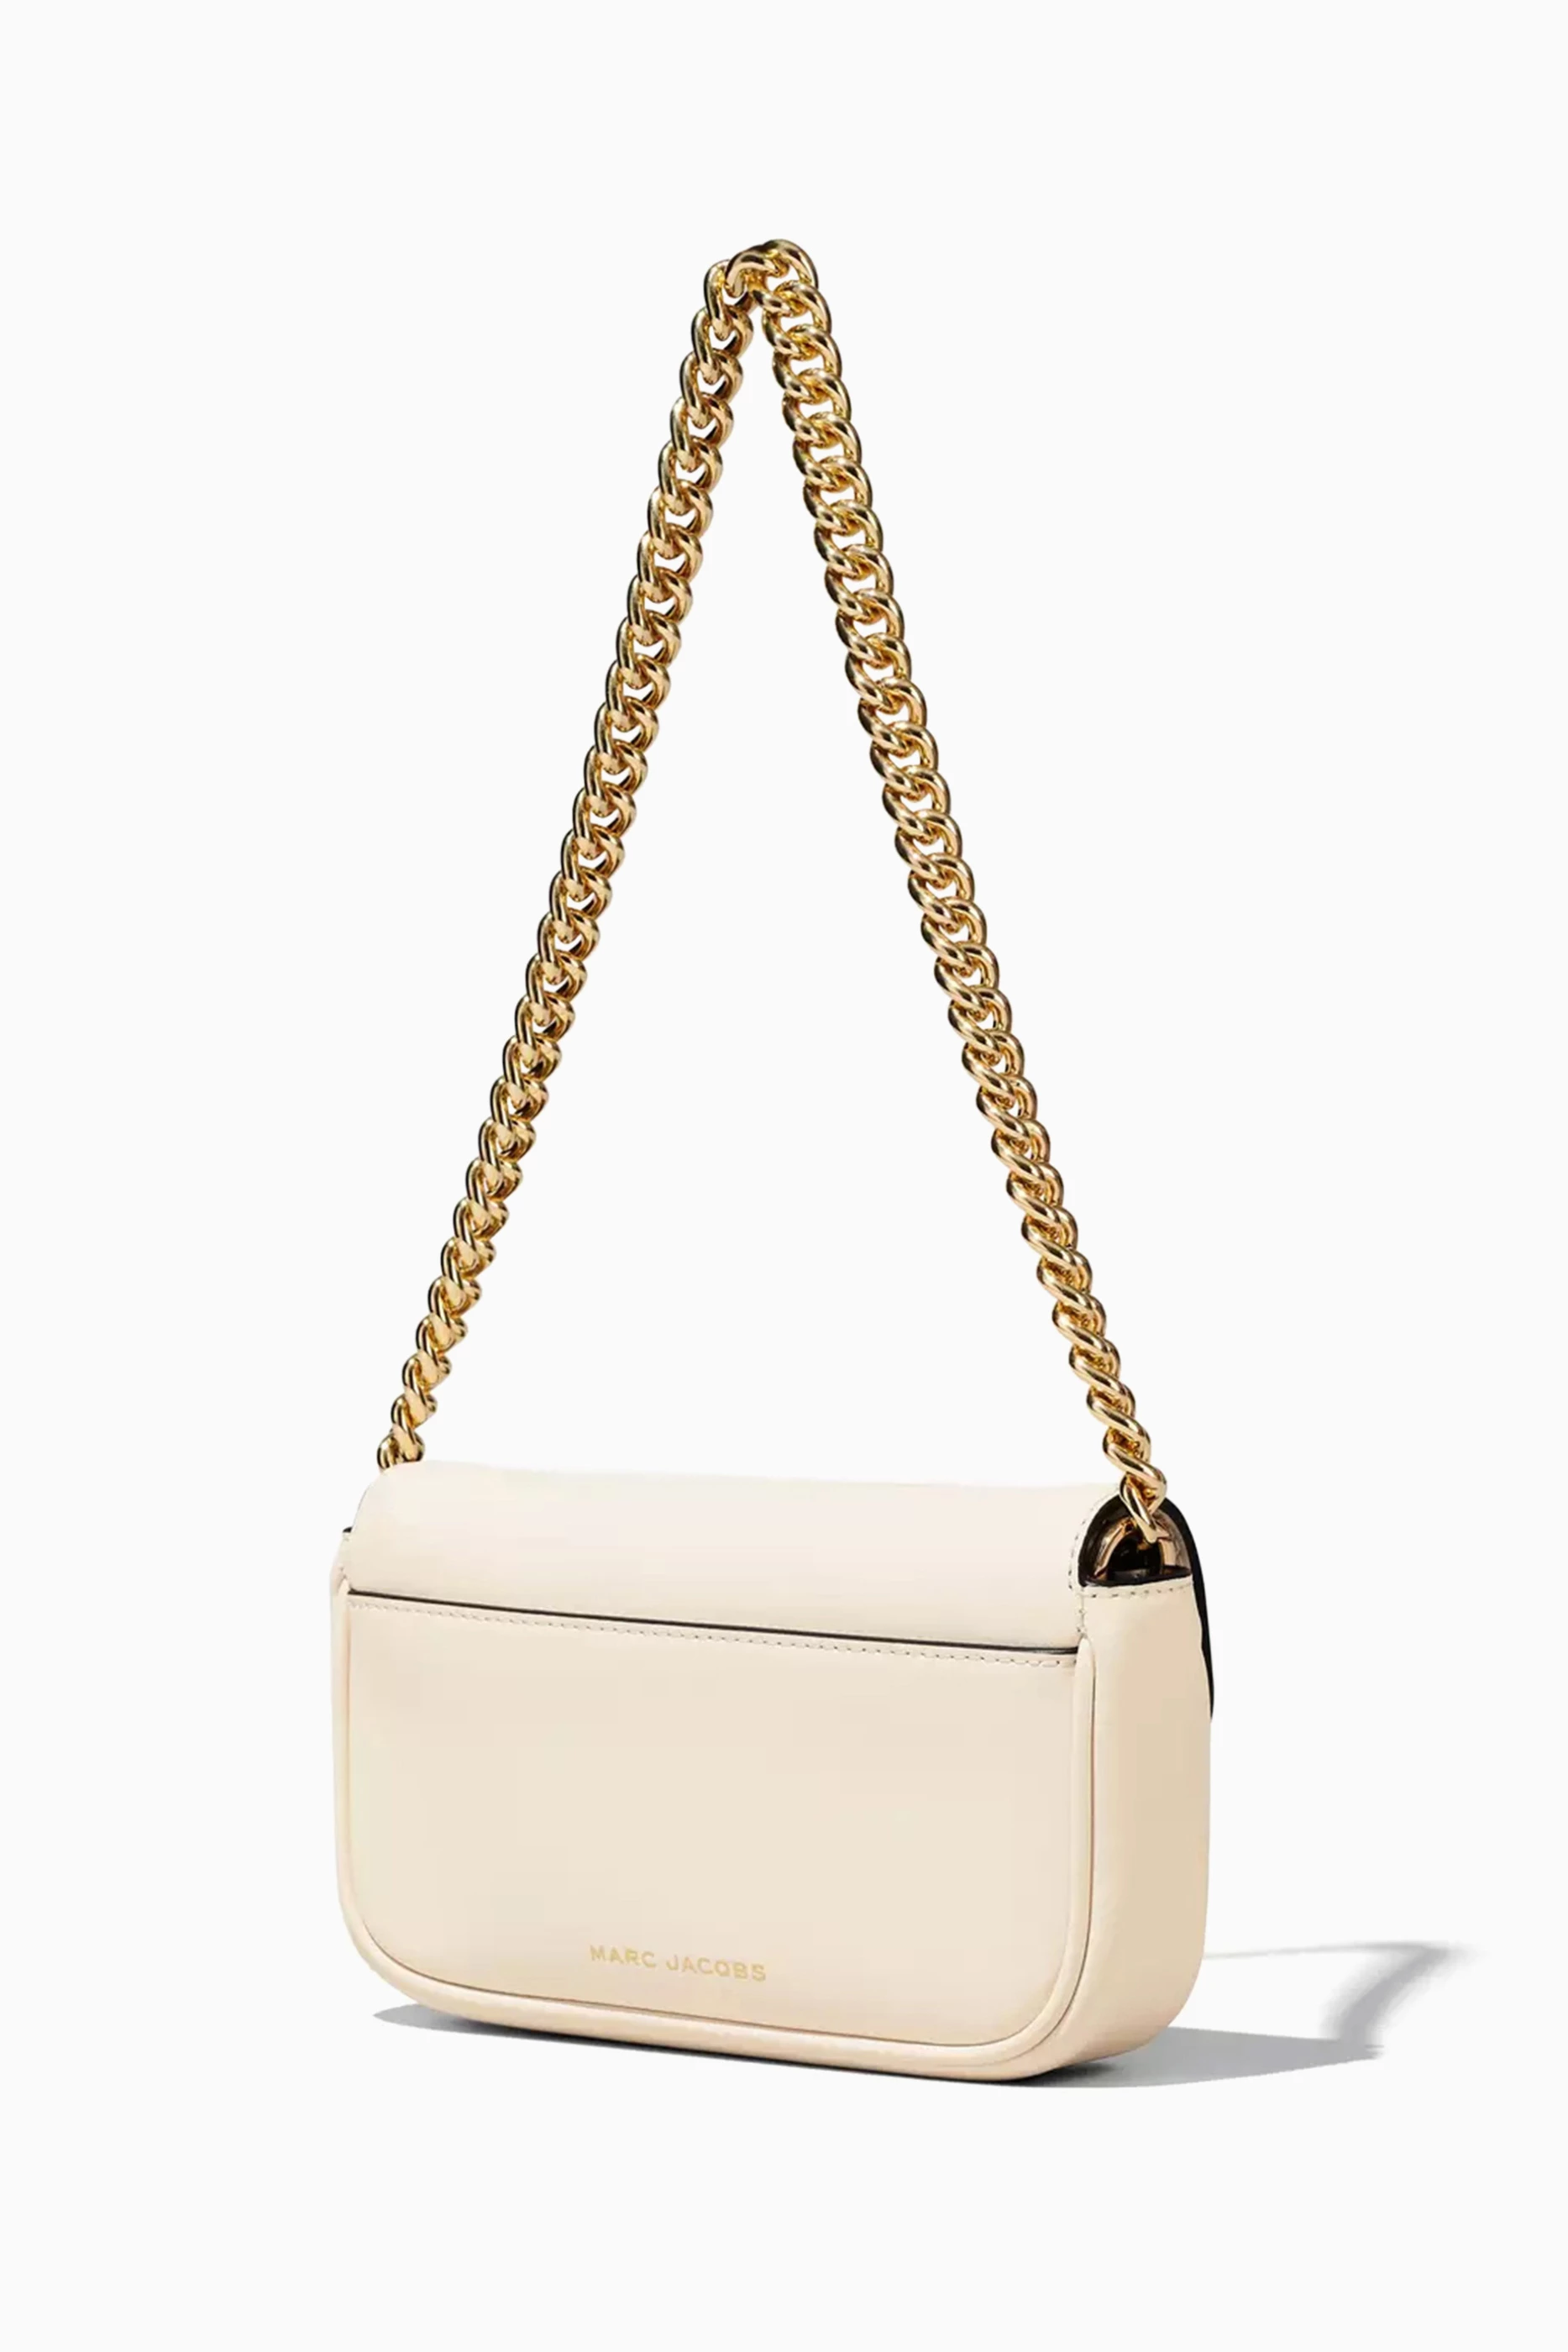  The J Marc White Leather Bag